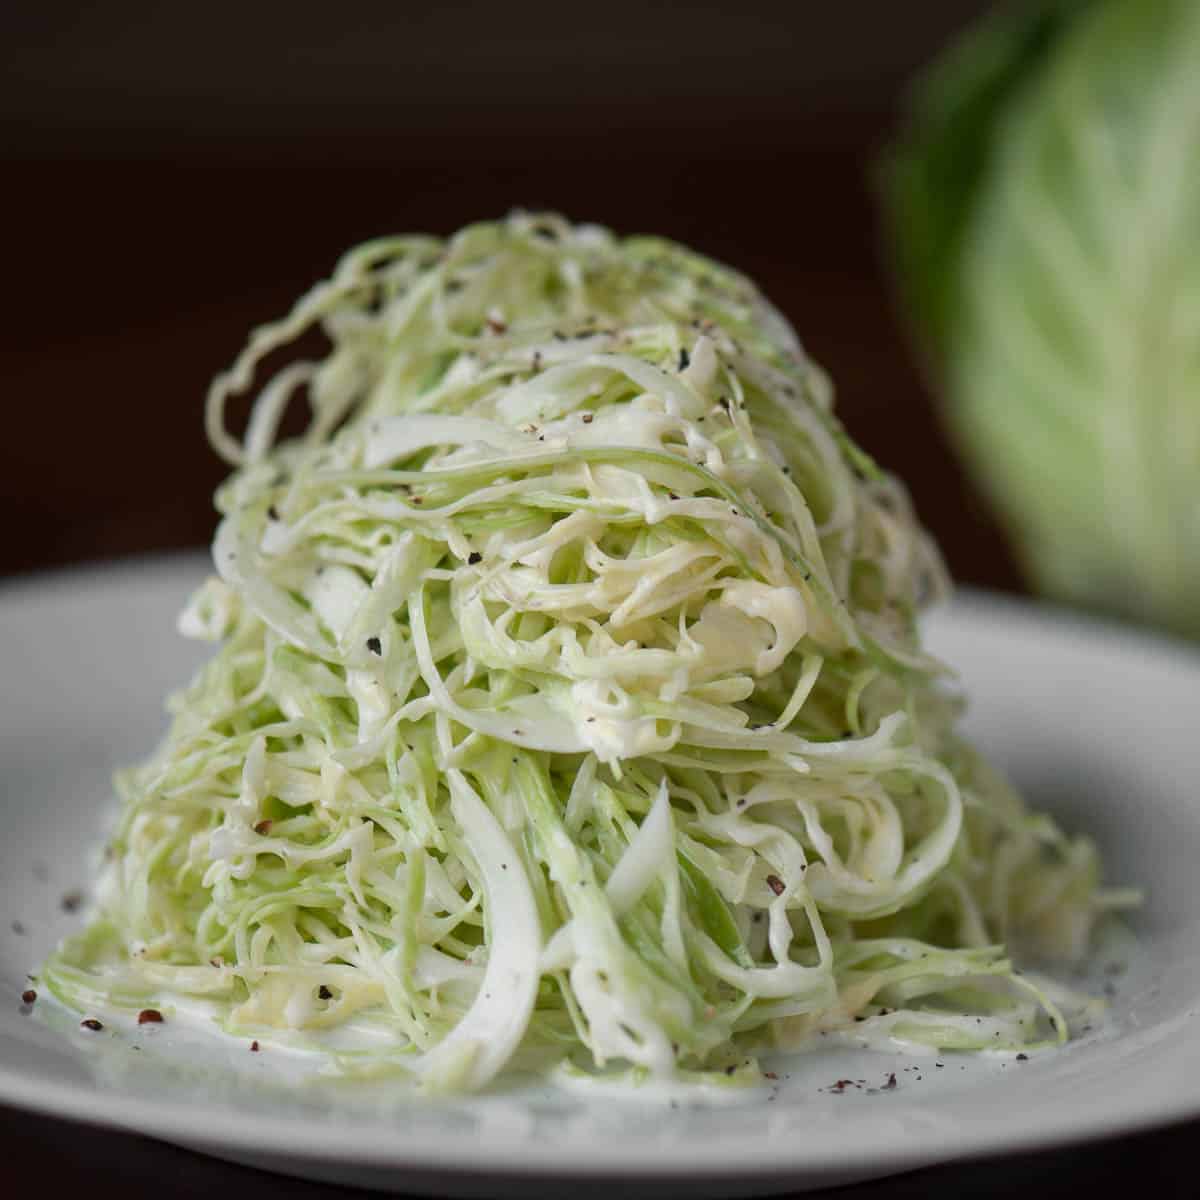 https://selfproclaimedfoodie.com/wp-content/uploads/angel-hair-coleslaw-square-1.jpg